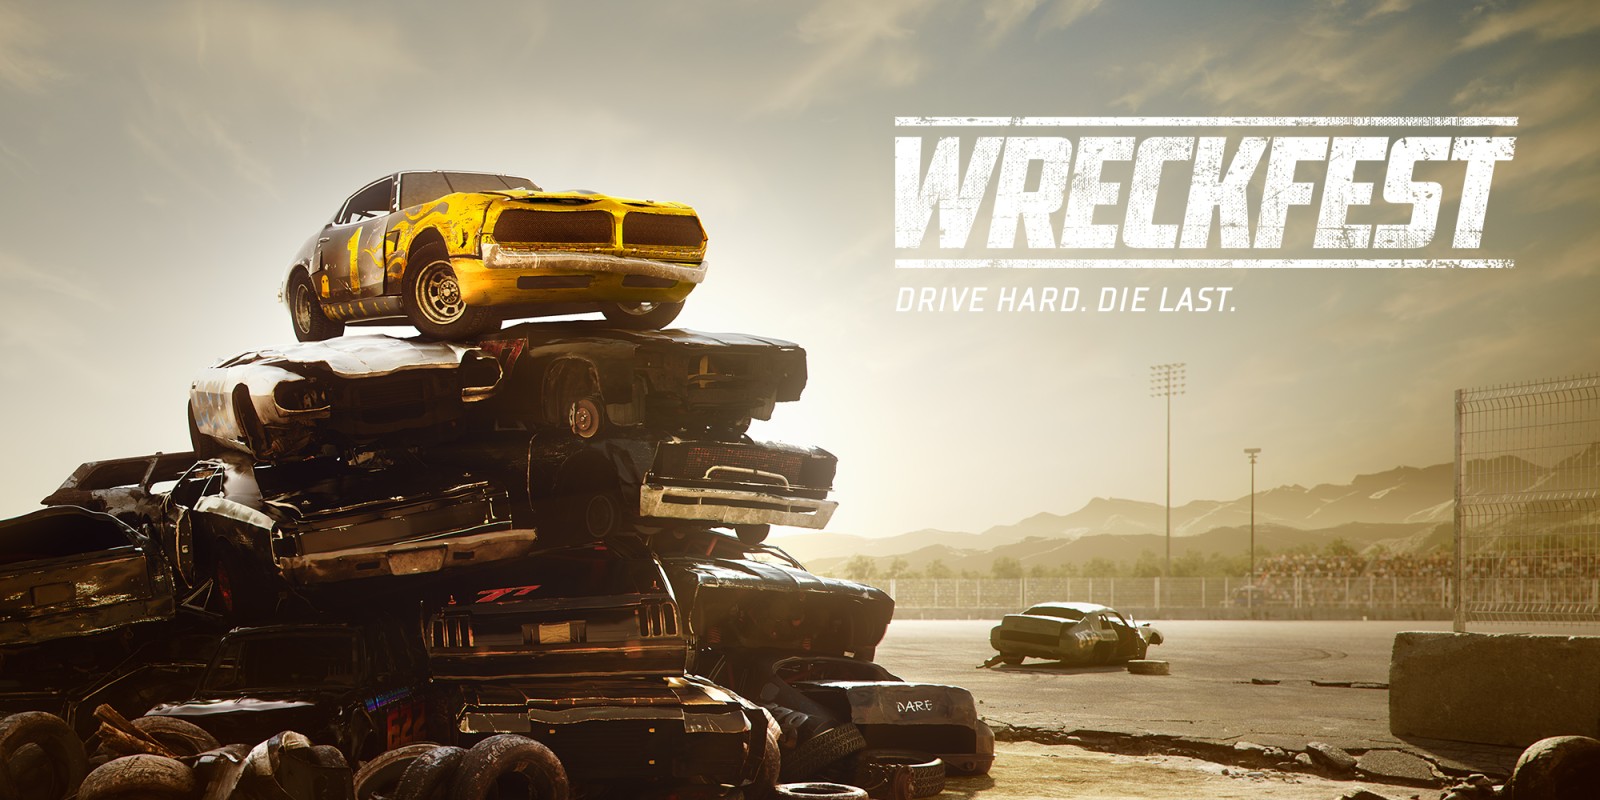 La5t Game You Fini5hed And Your Thought5 - Page 22 H2x1_NSwitch_Wreckfest_image1600w